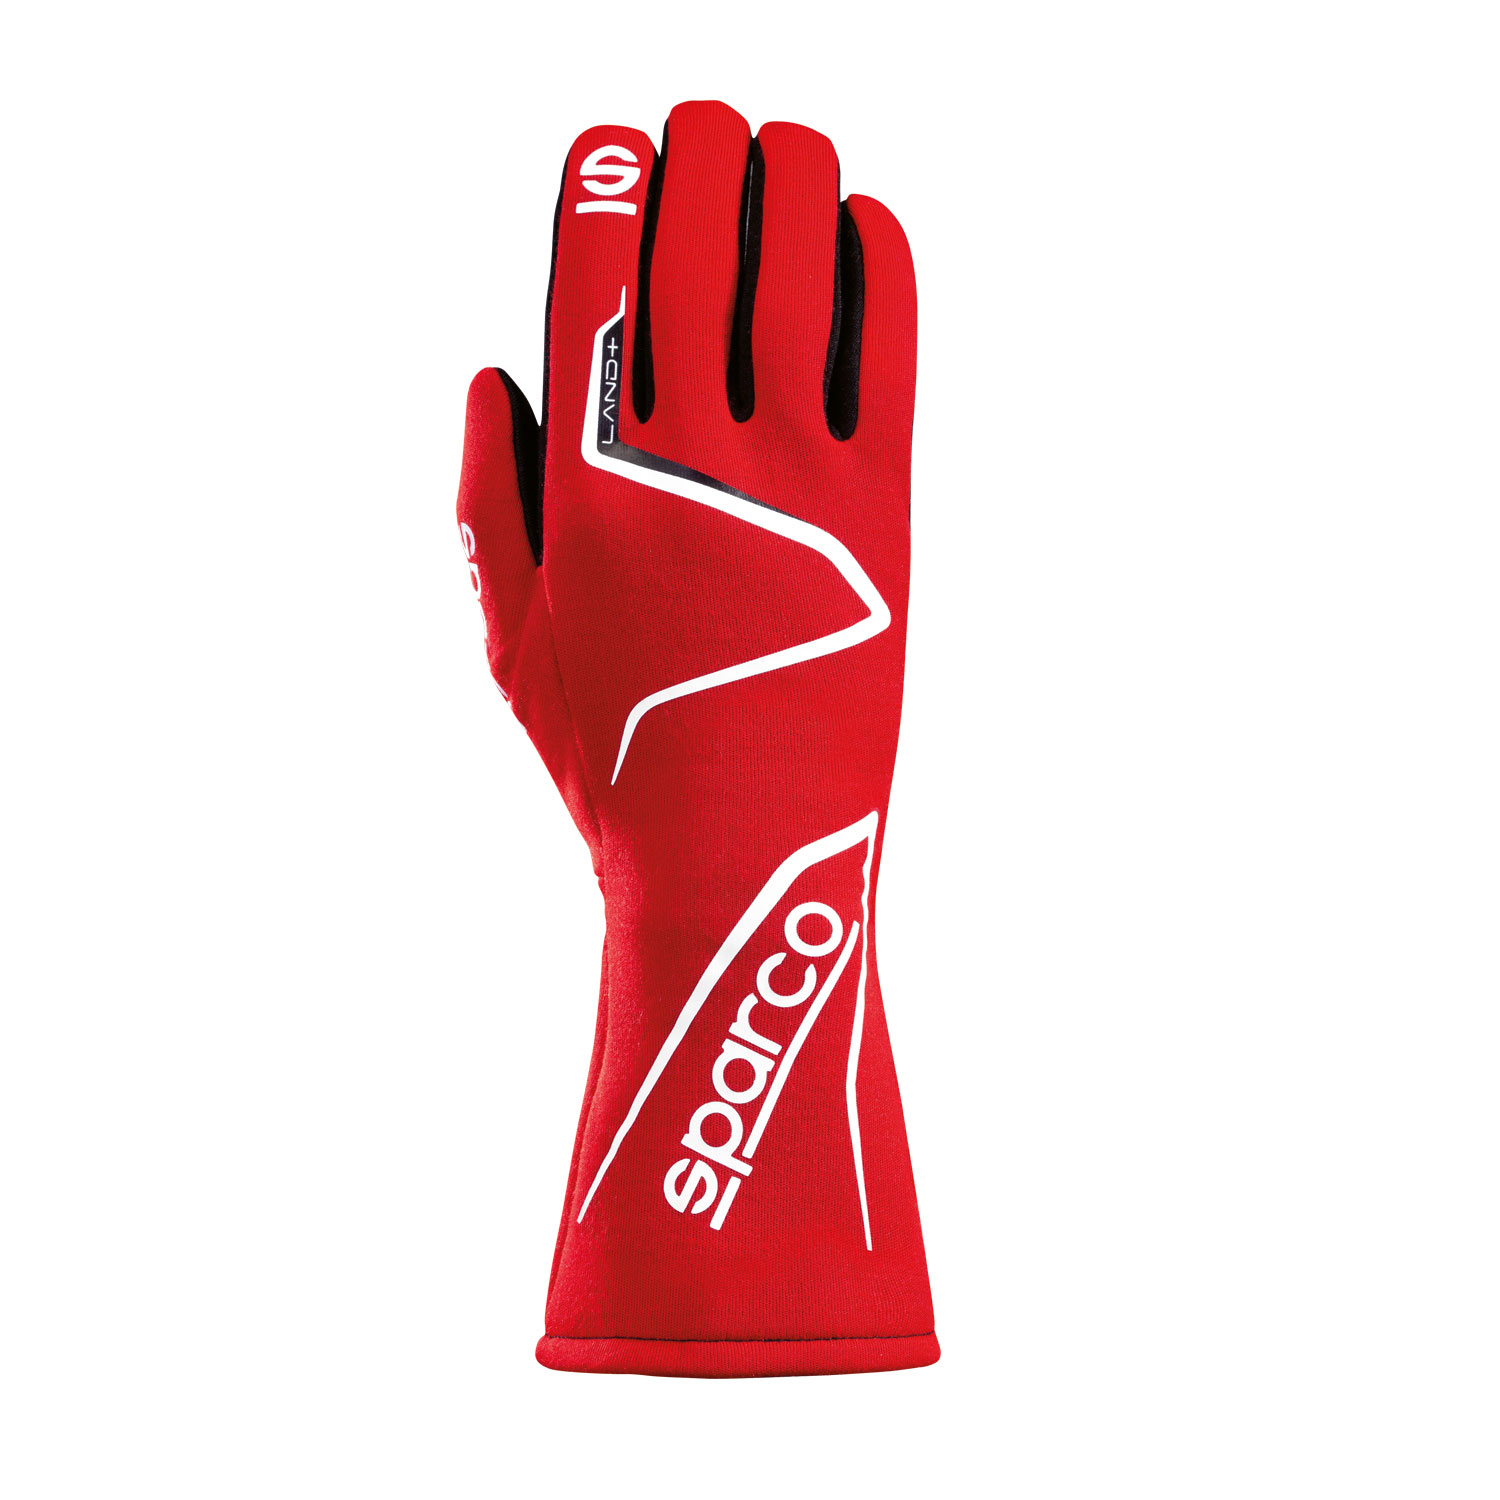 Sparco Handschuh Land+, rot